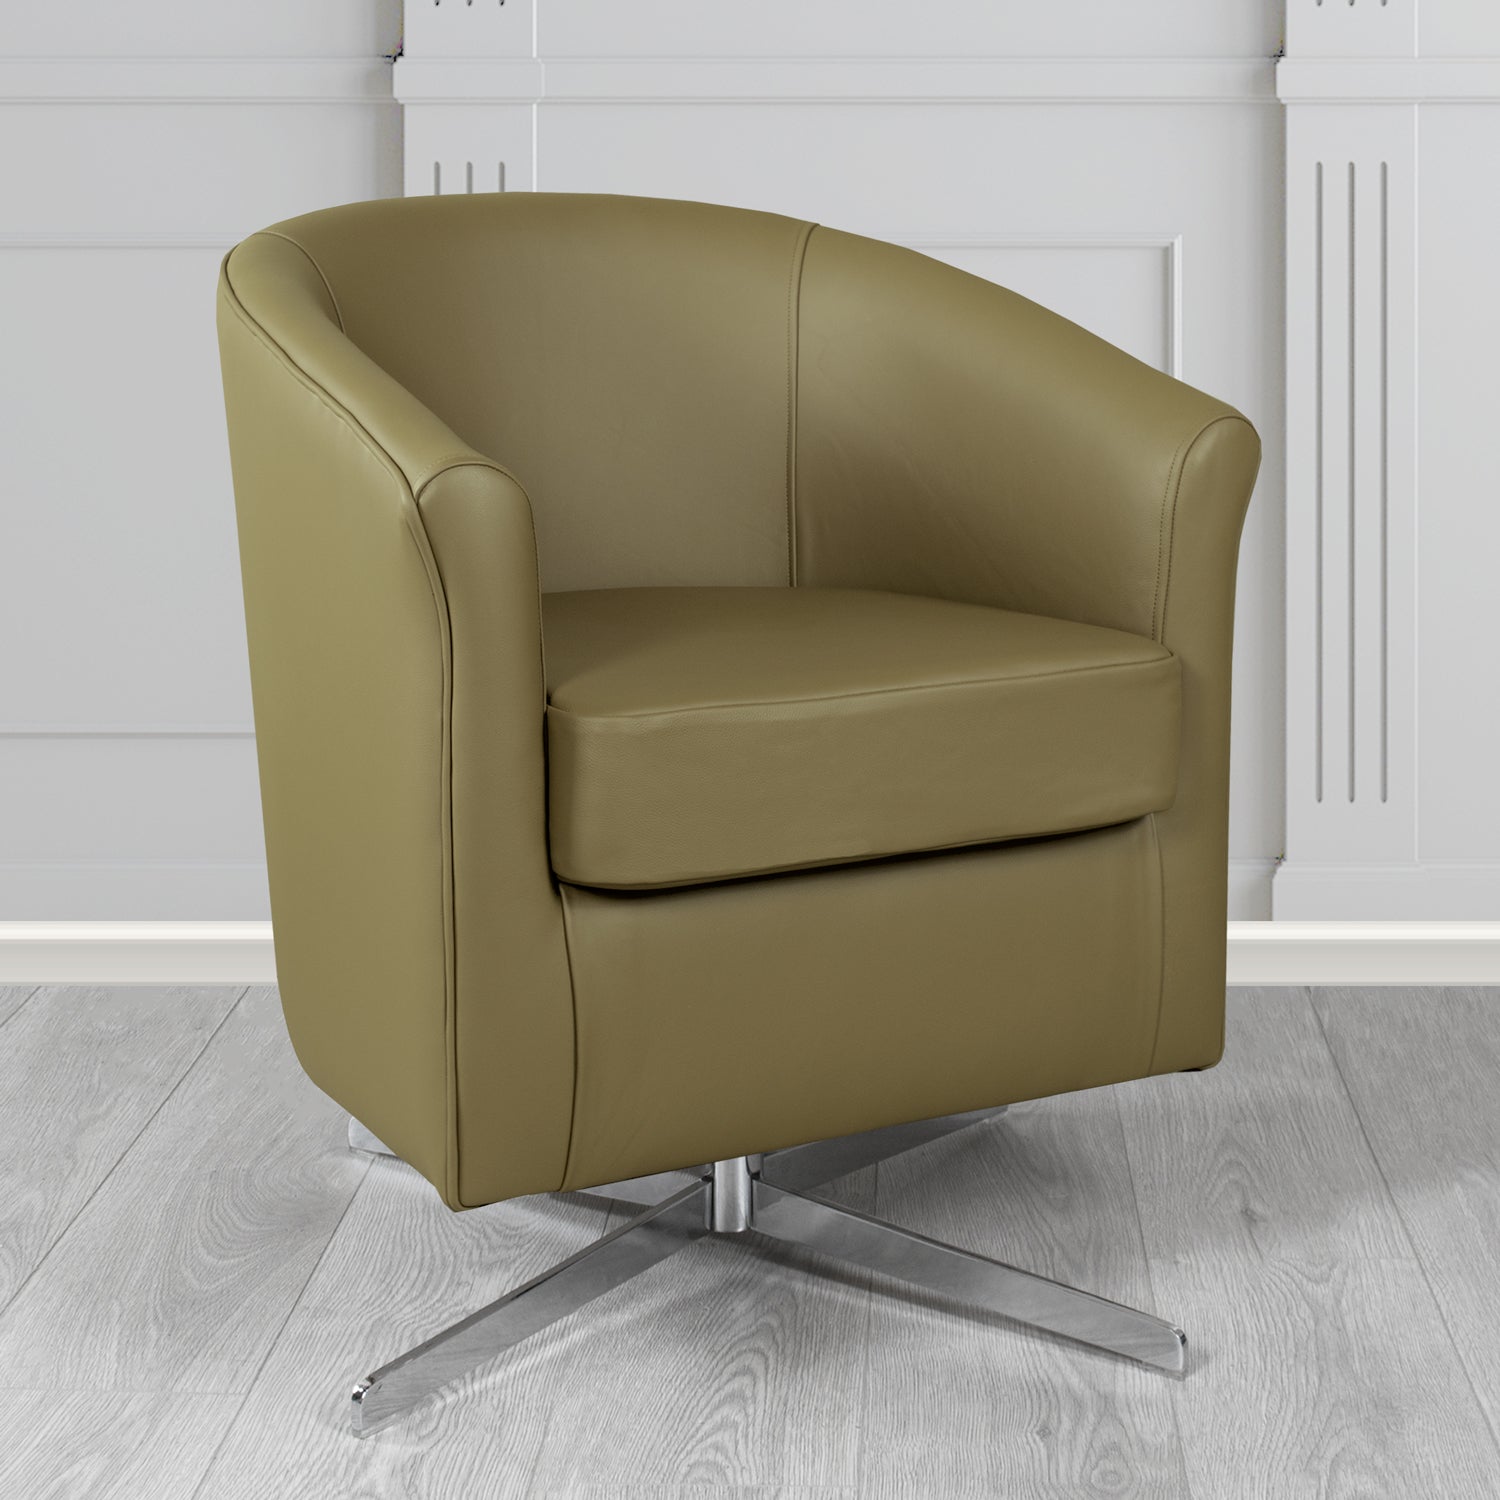 Cannes Swivel Tub Chair in Shelly Sage Crib 5 Genuine Leather - The Tub Chair Shop